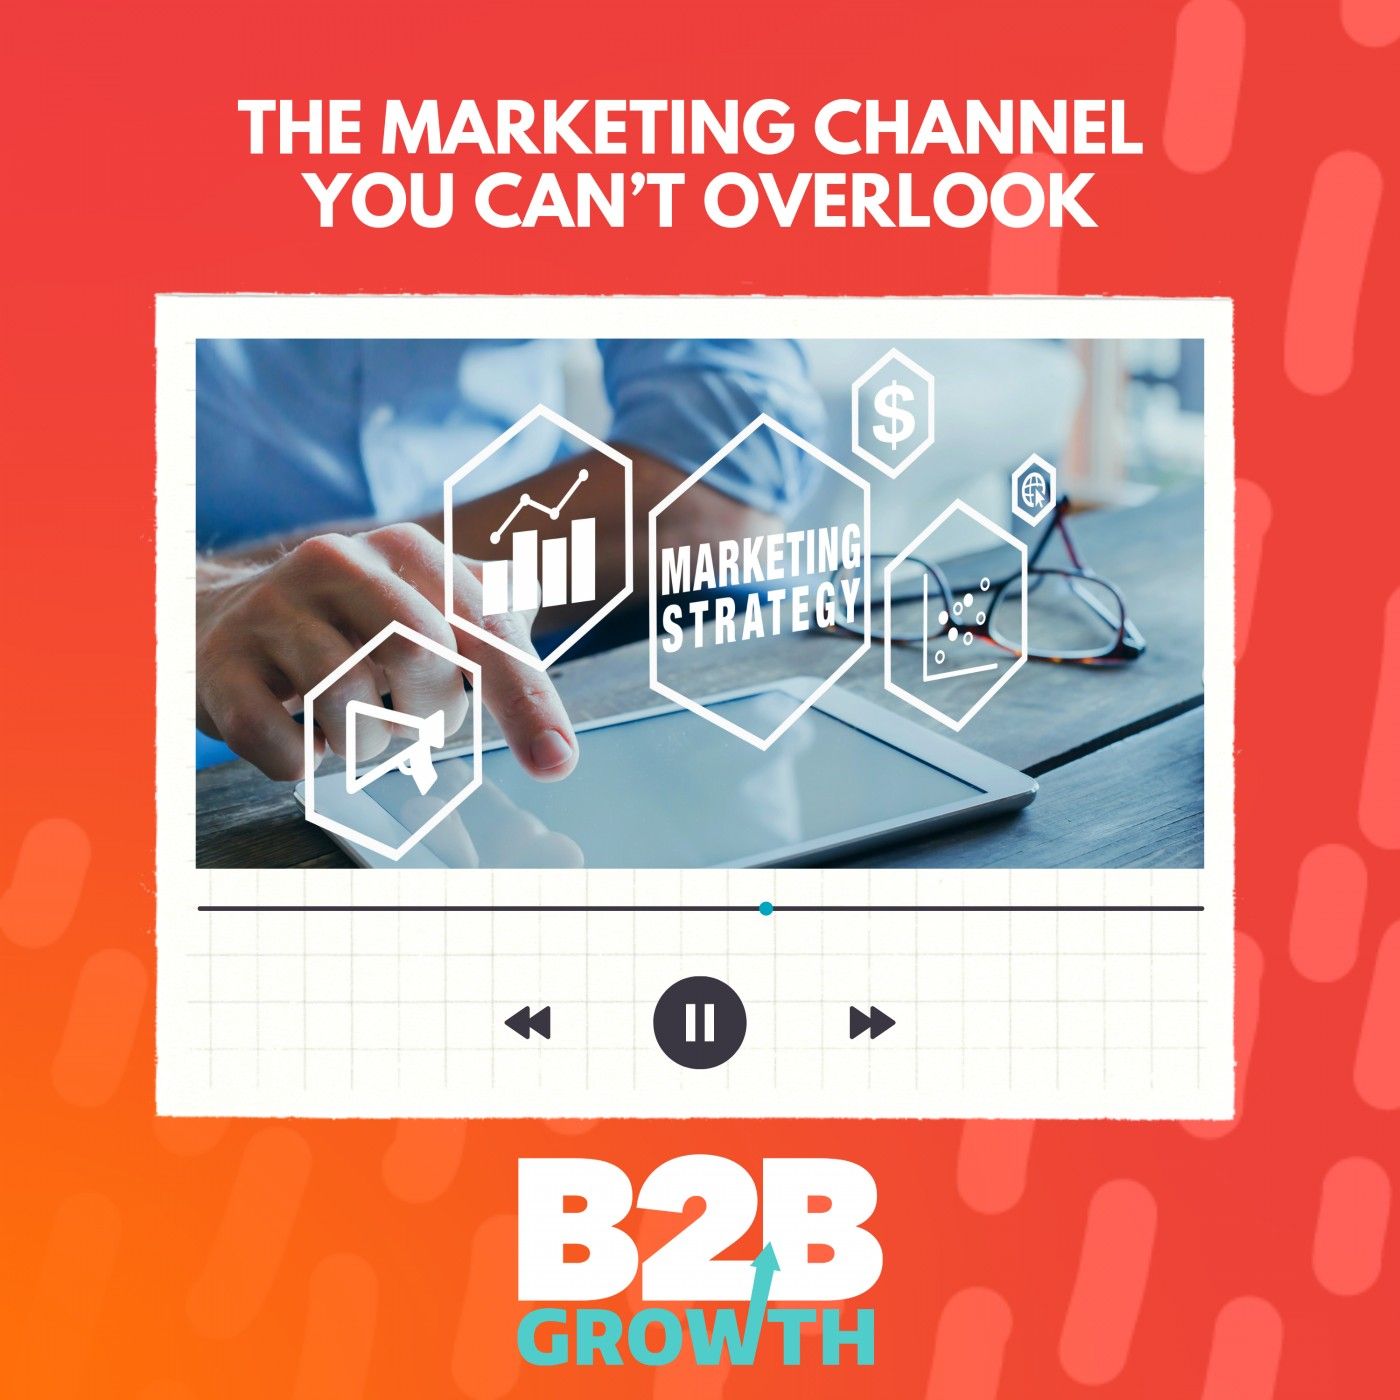 The Marketing Channel You Can’t Overlook | Original Research